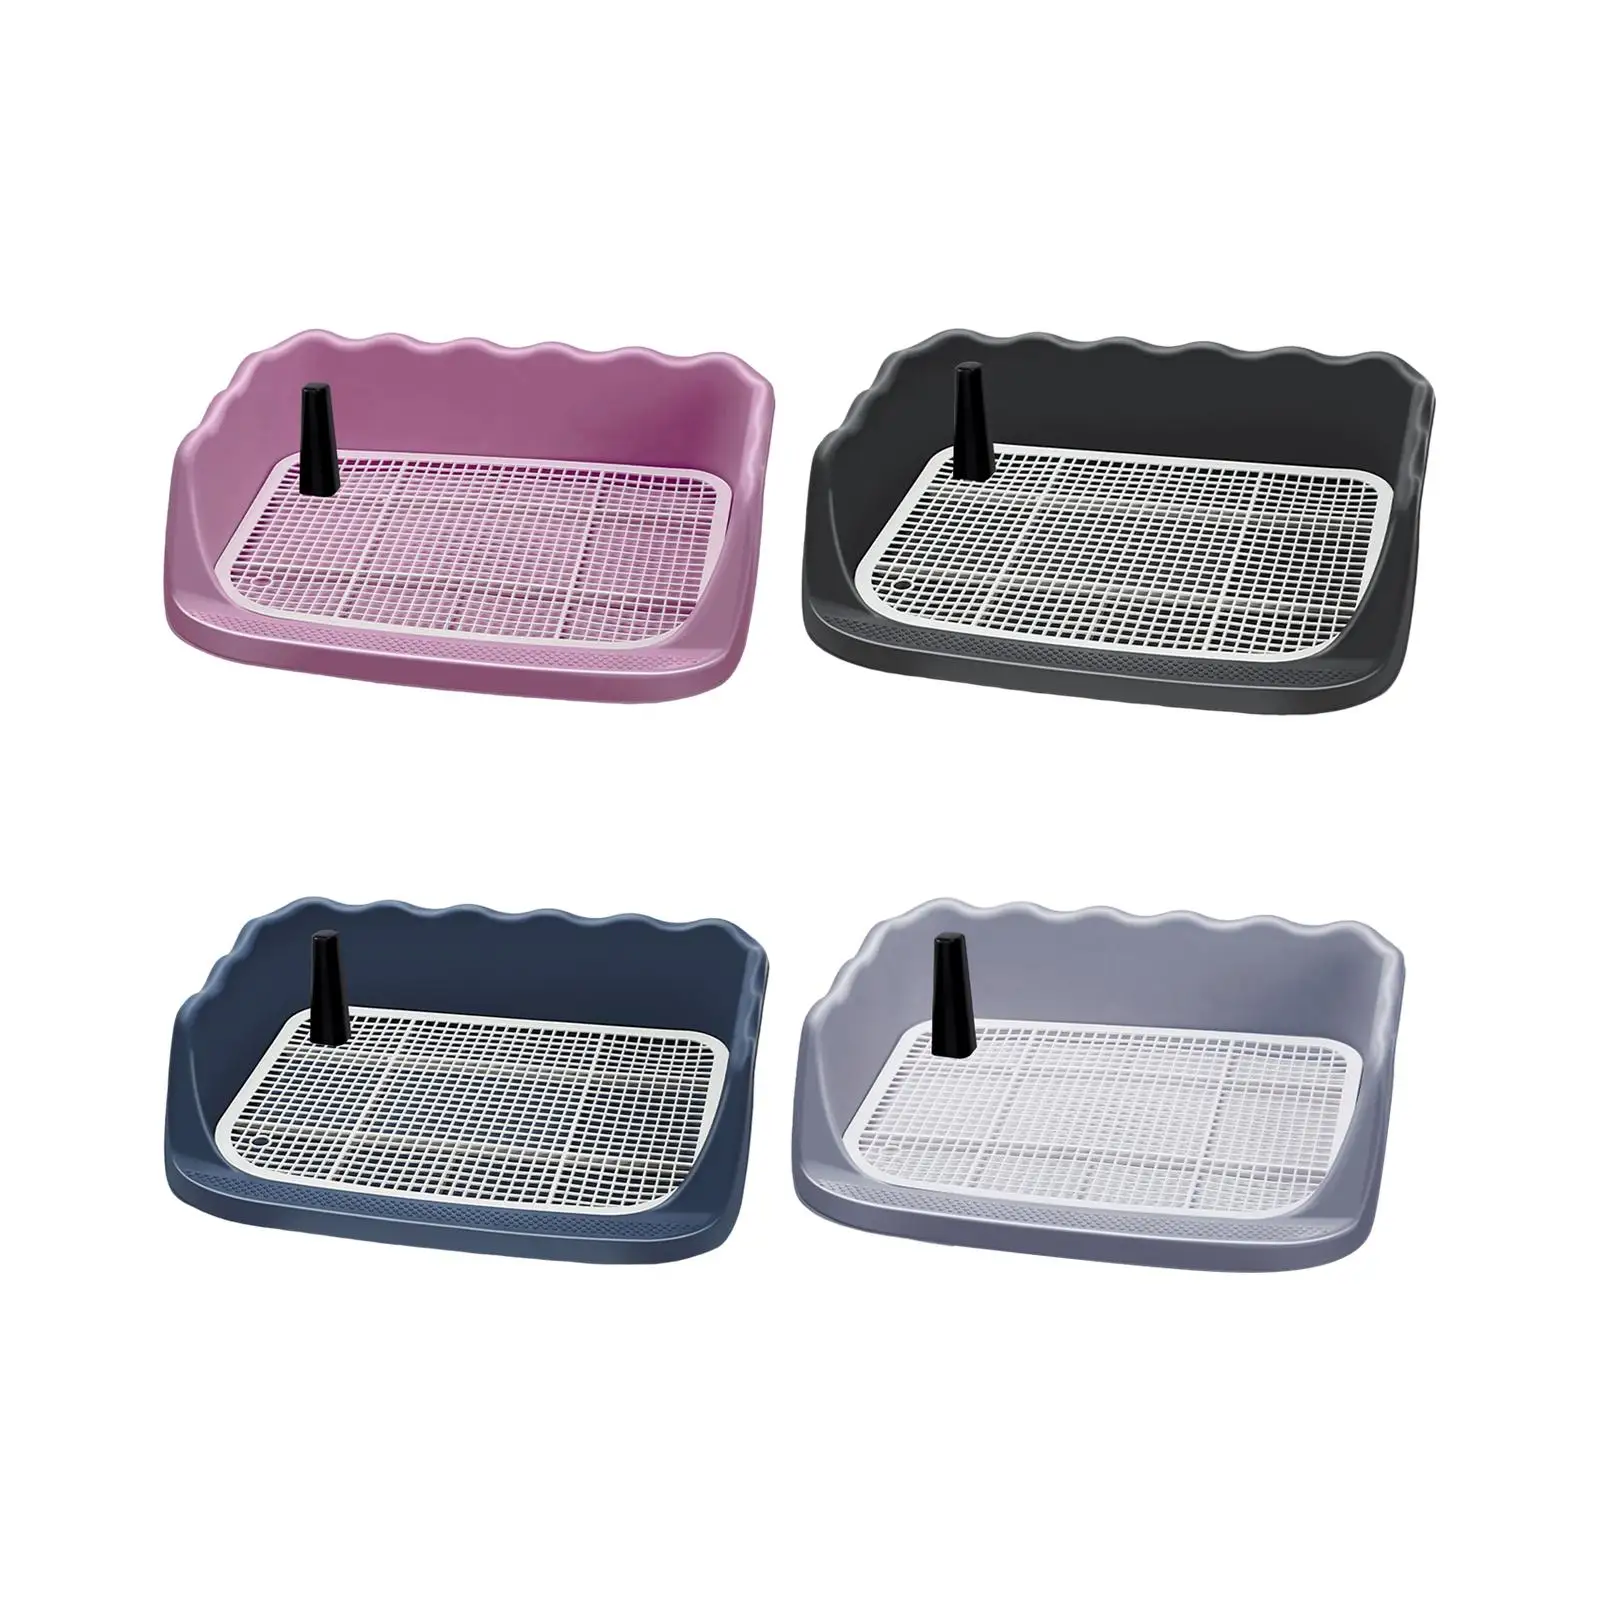 Dog Potty Tray with Protection Wall Every Side Guardrail Design for Indoor Large Easy to Clean Dogs Toilet for Small Animals